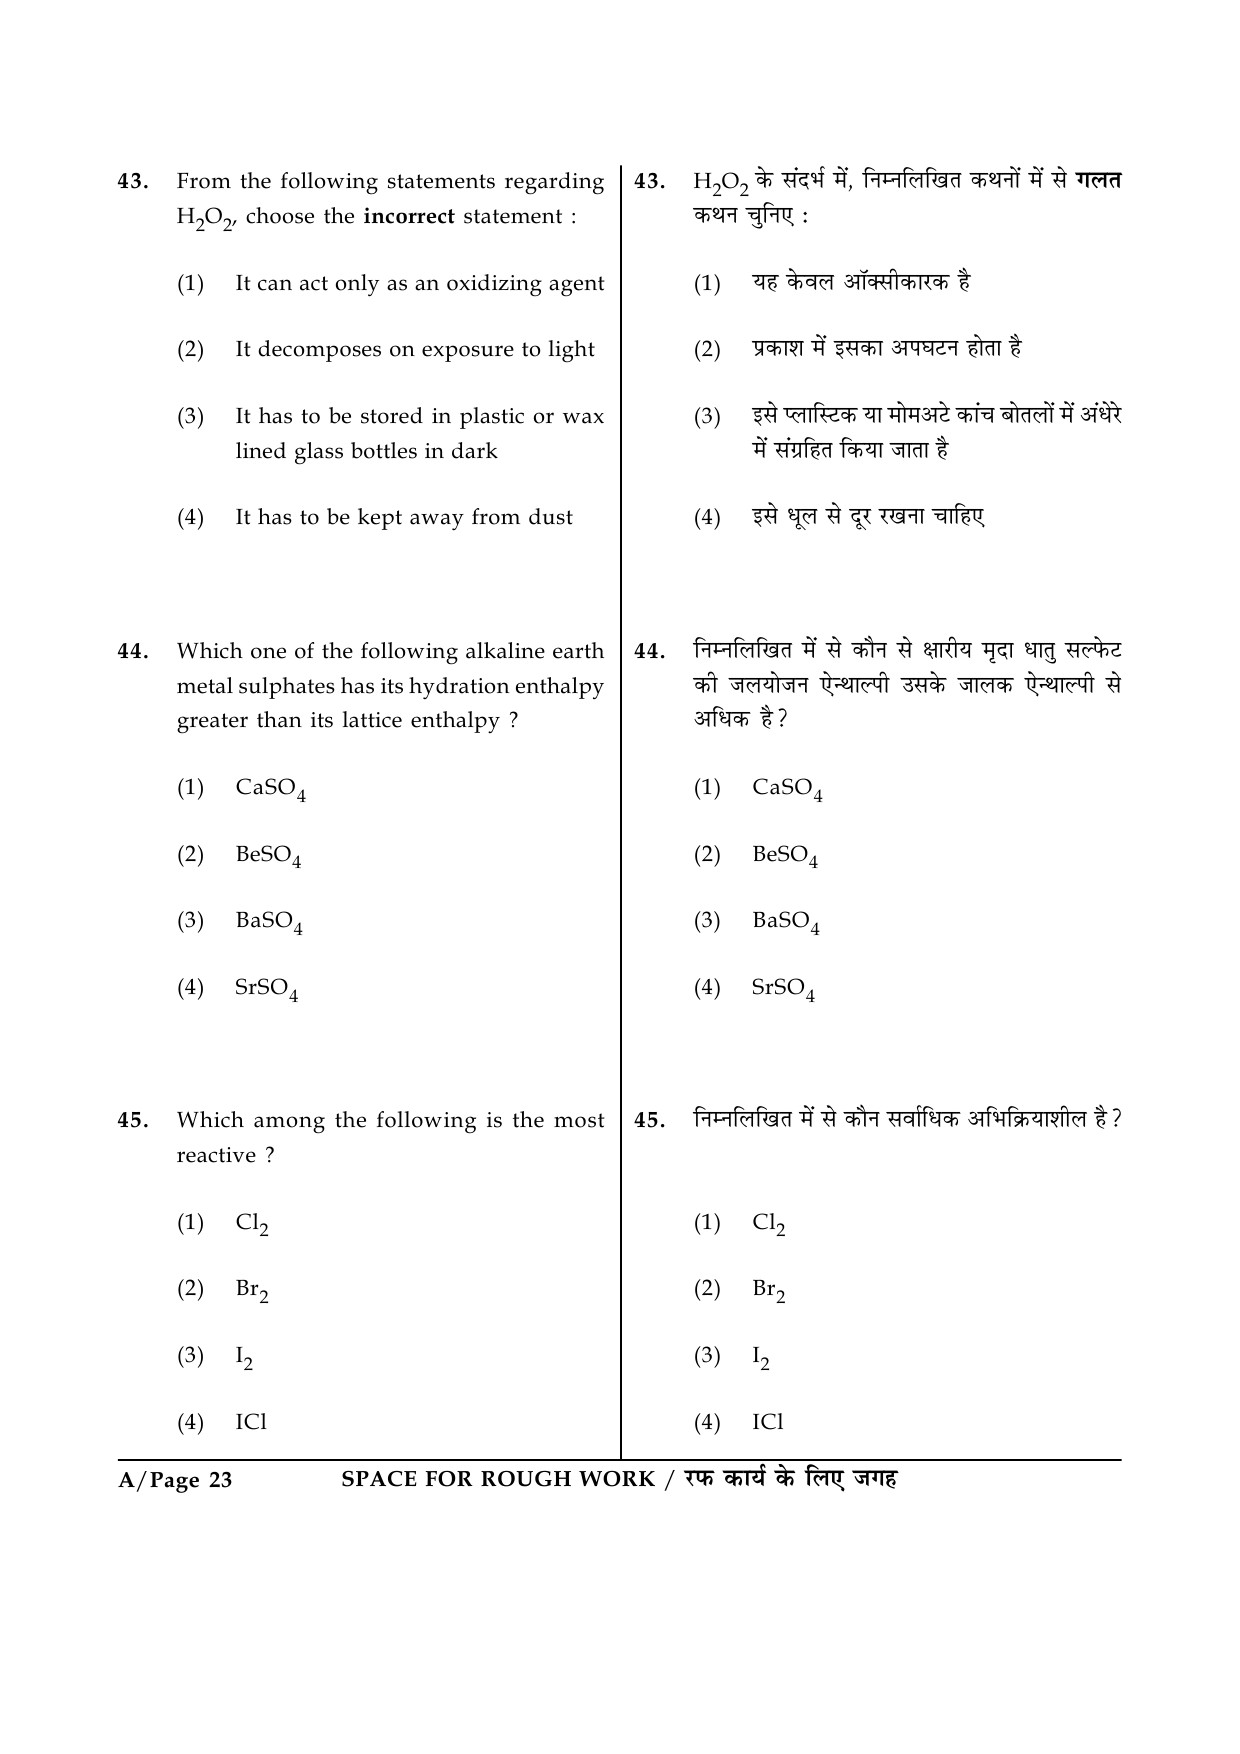 JEE Main Exam Question Paper 2015 Booklet A 23